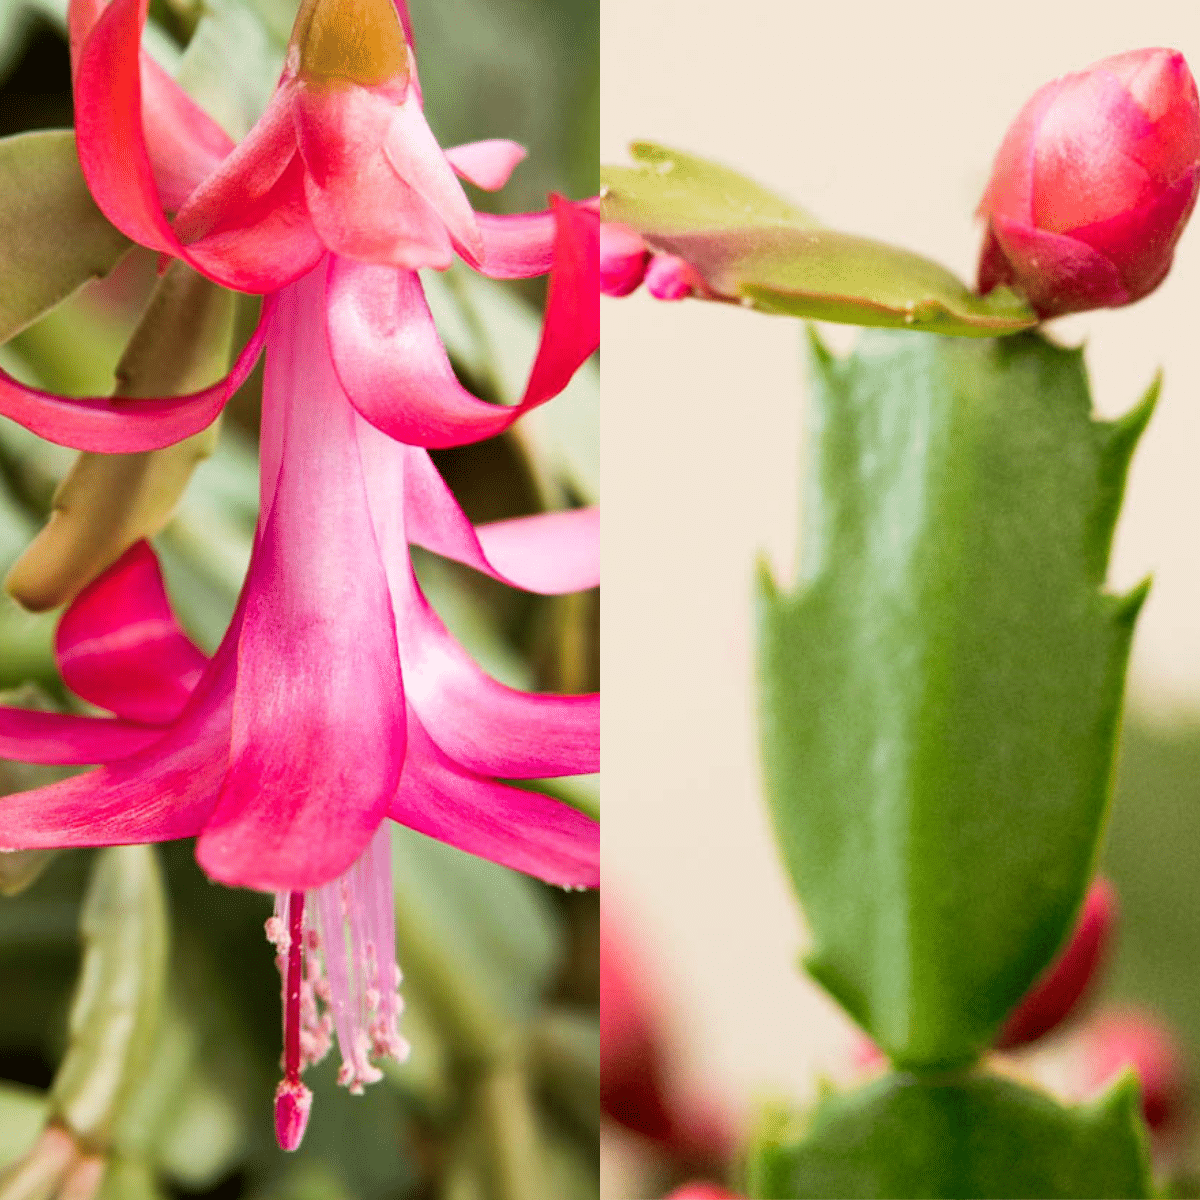 Thanksgiving Cactus Vs Christmas Cactus (Main Differences)